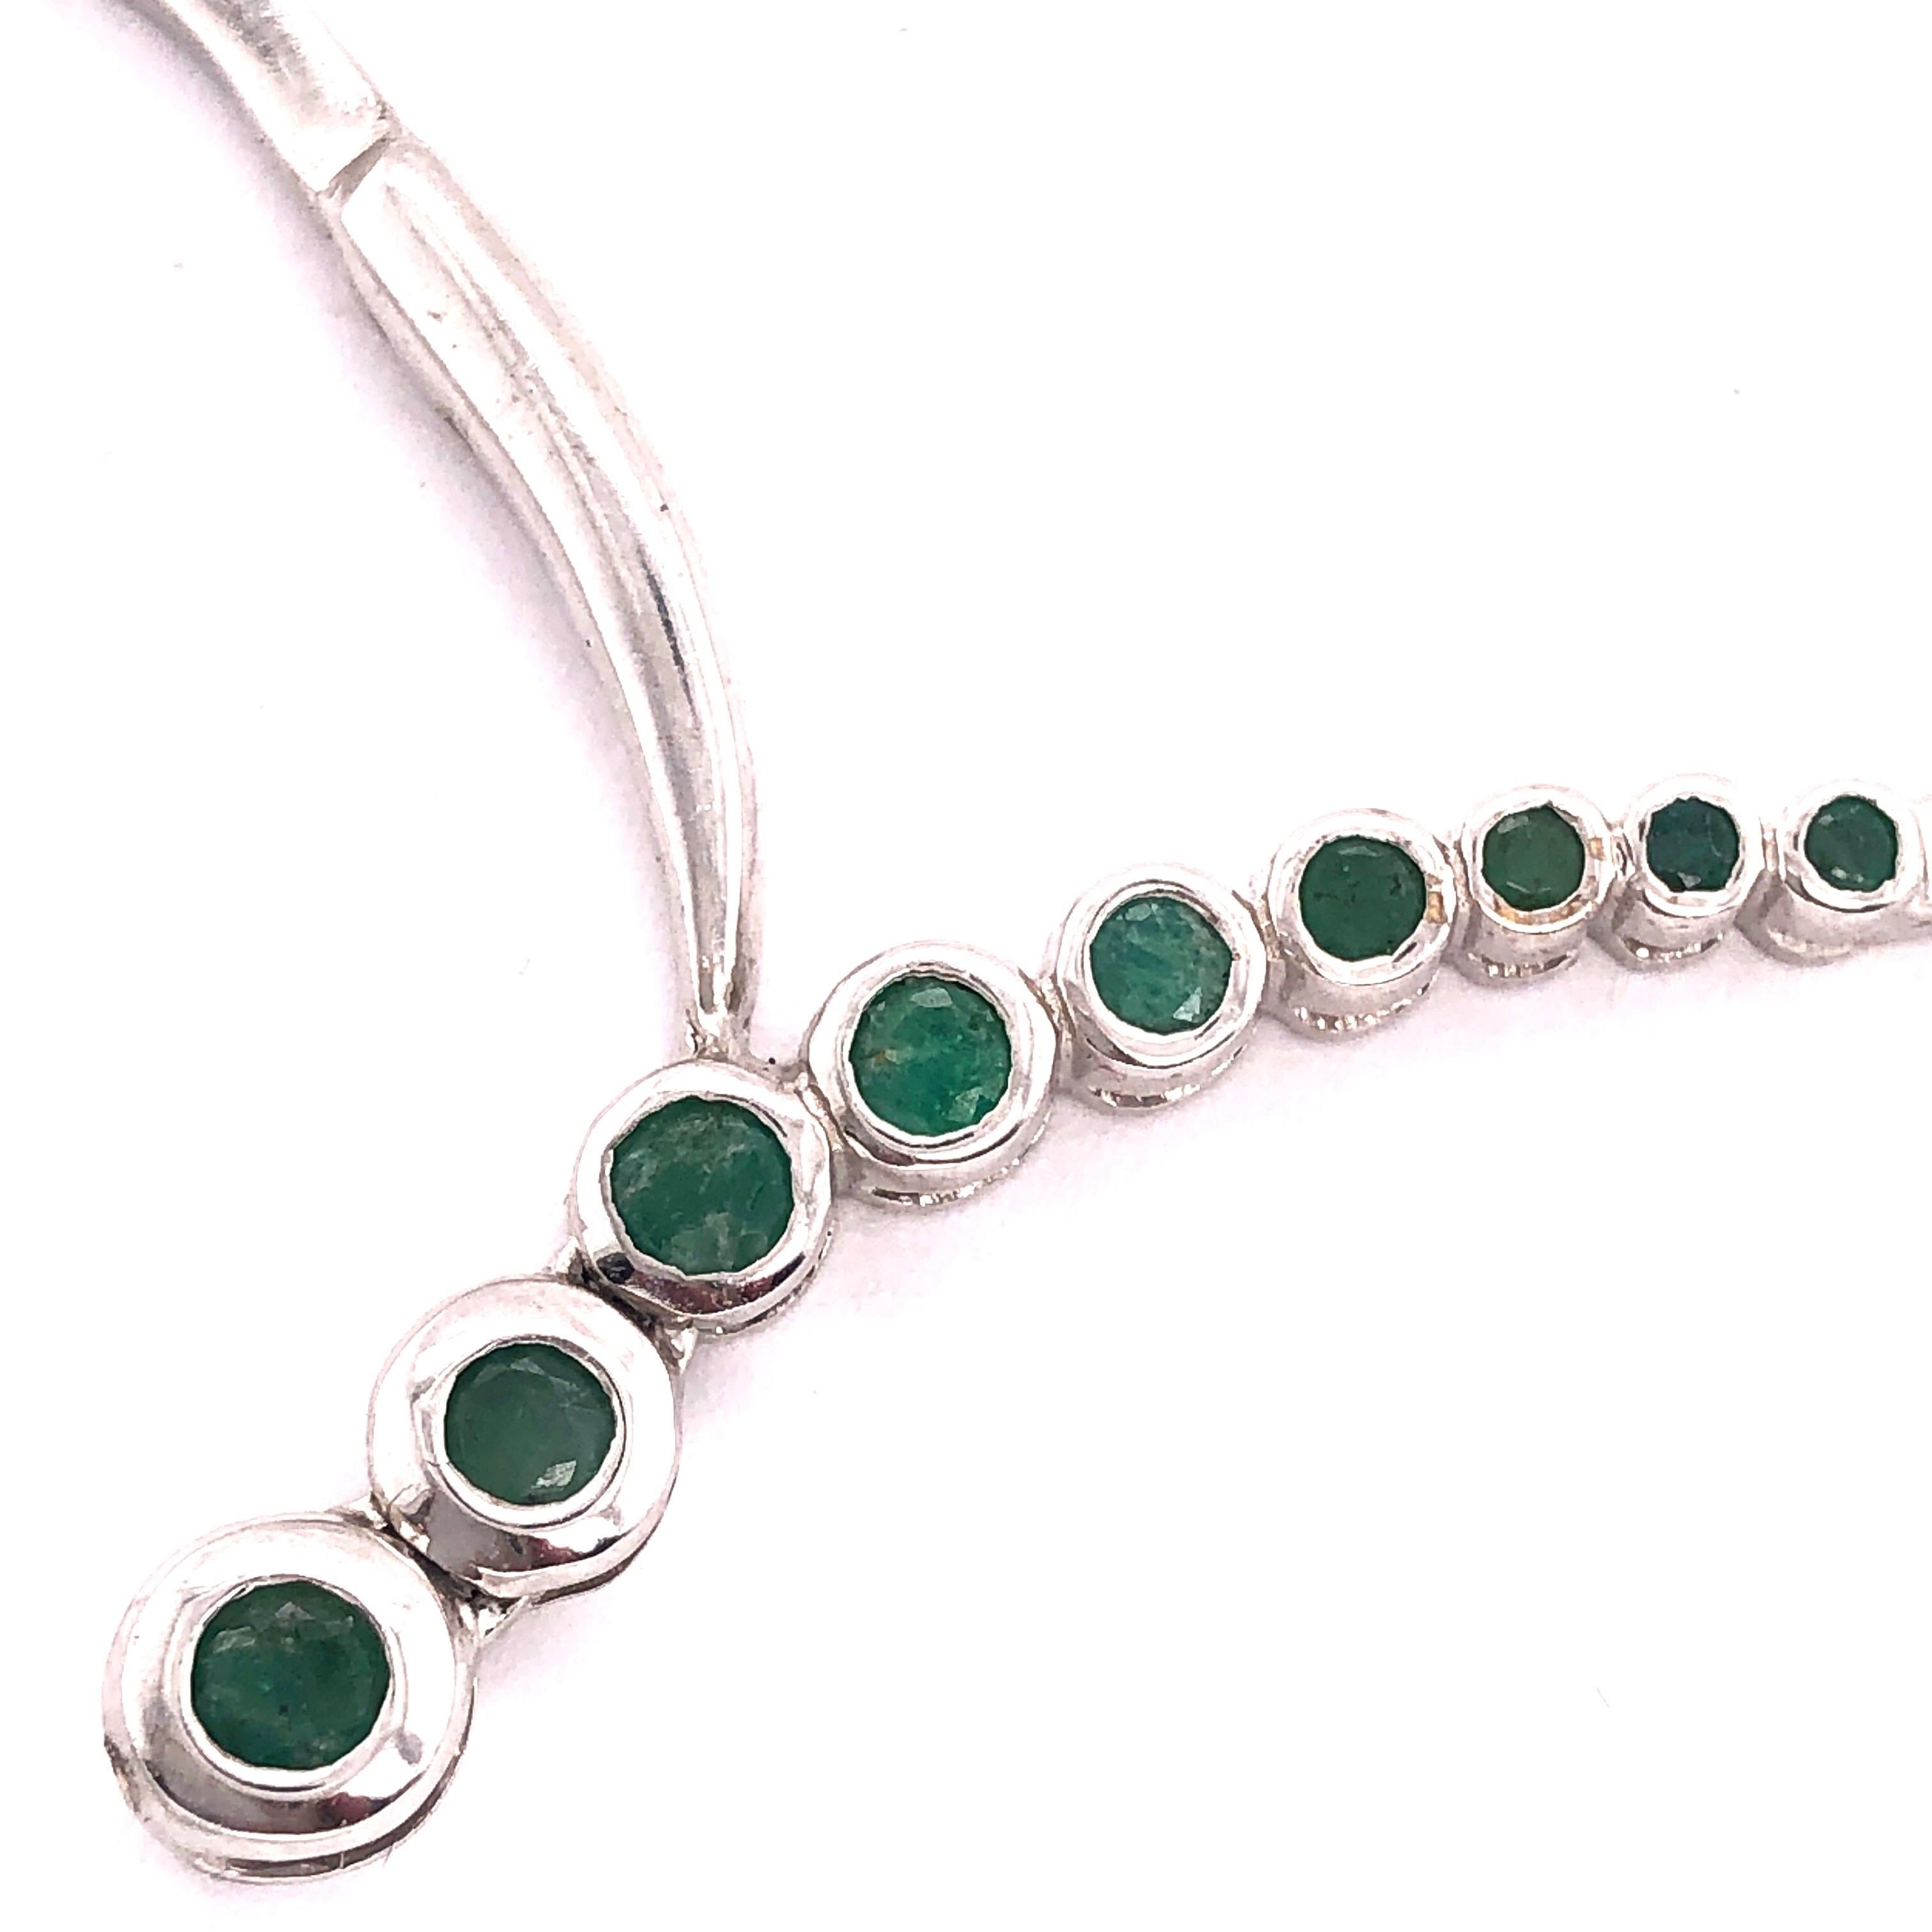 14 Karat White Gold 17 Inch Fashion Necklace with Round Emeralds.
18.4 grams total weight.